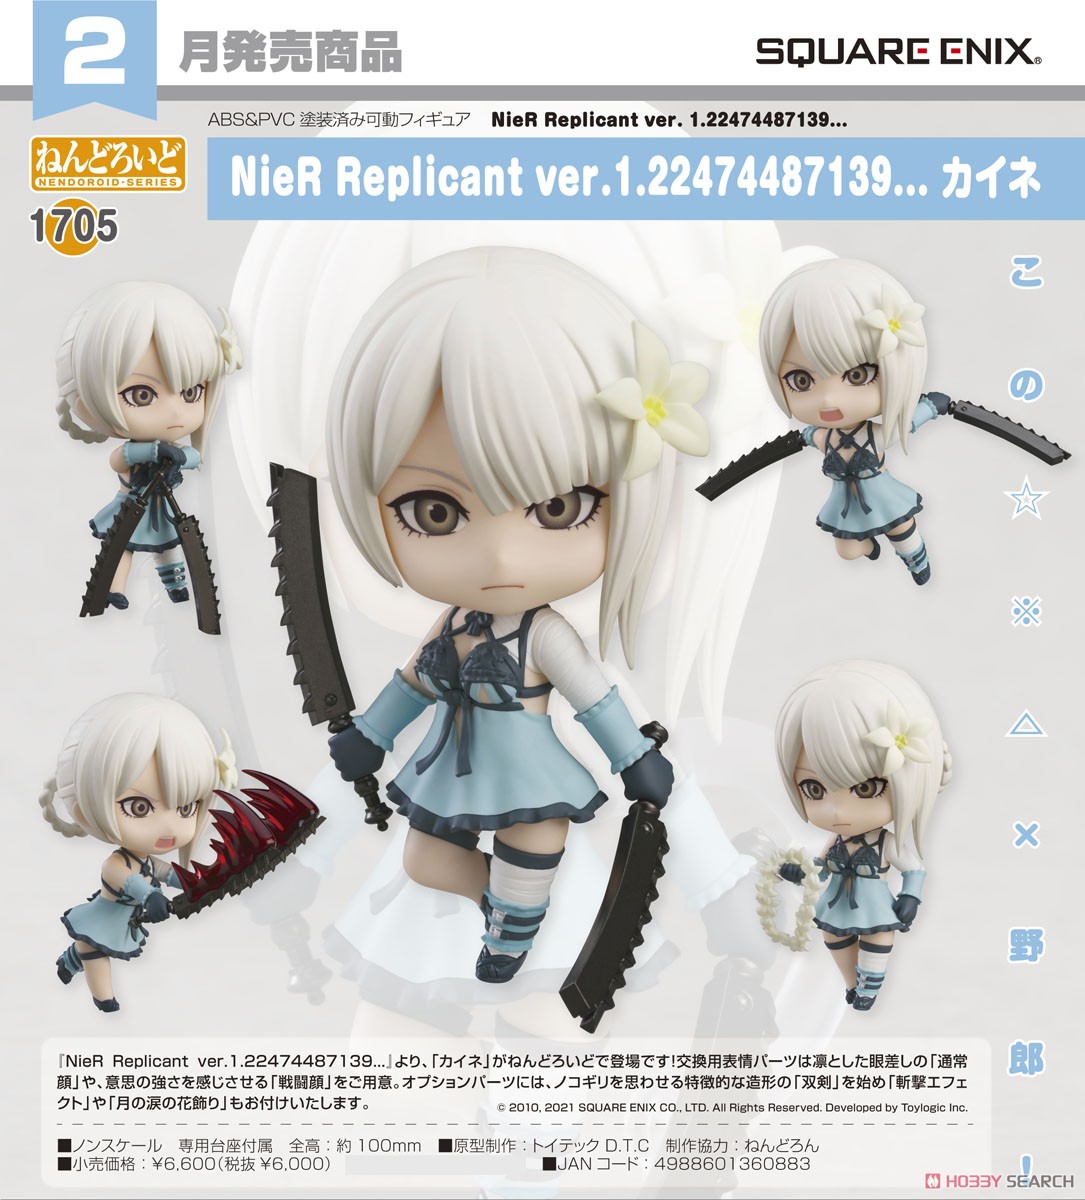 Nendoroid Nier Replicant Ver.1.22474487139... Kaine (Completed) Item picture6